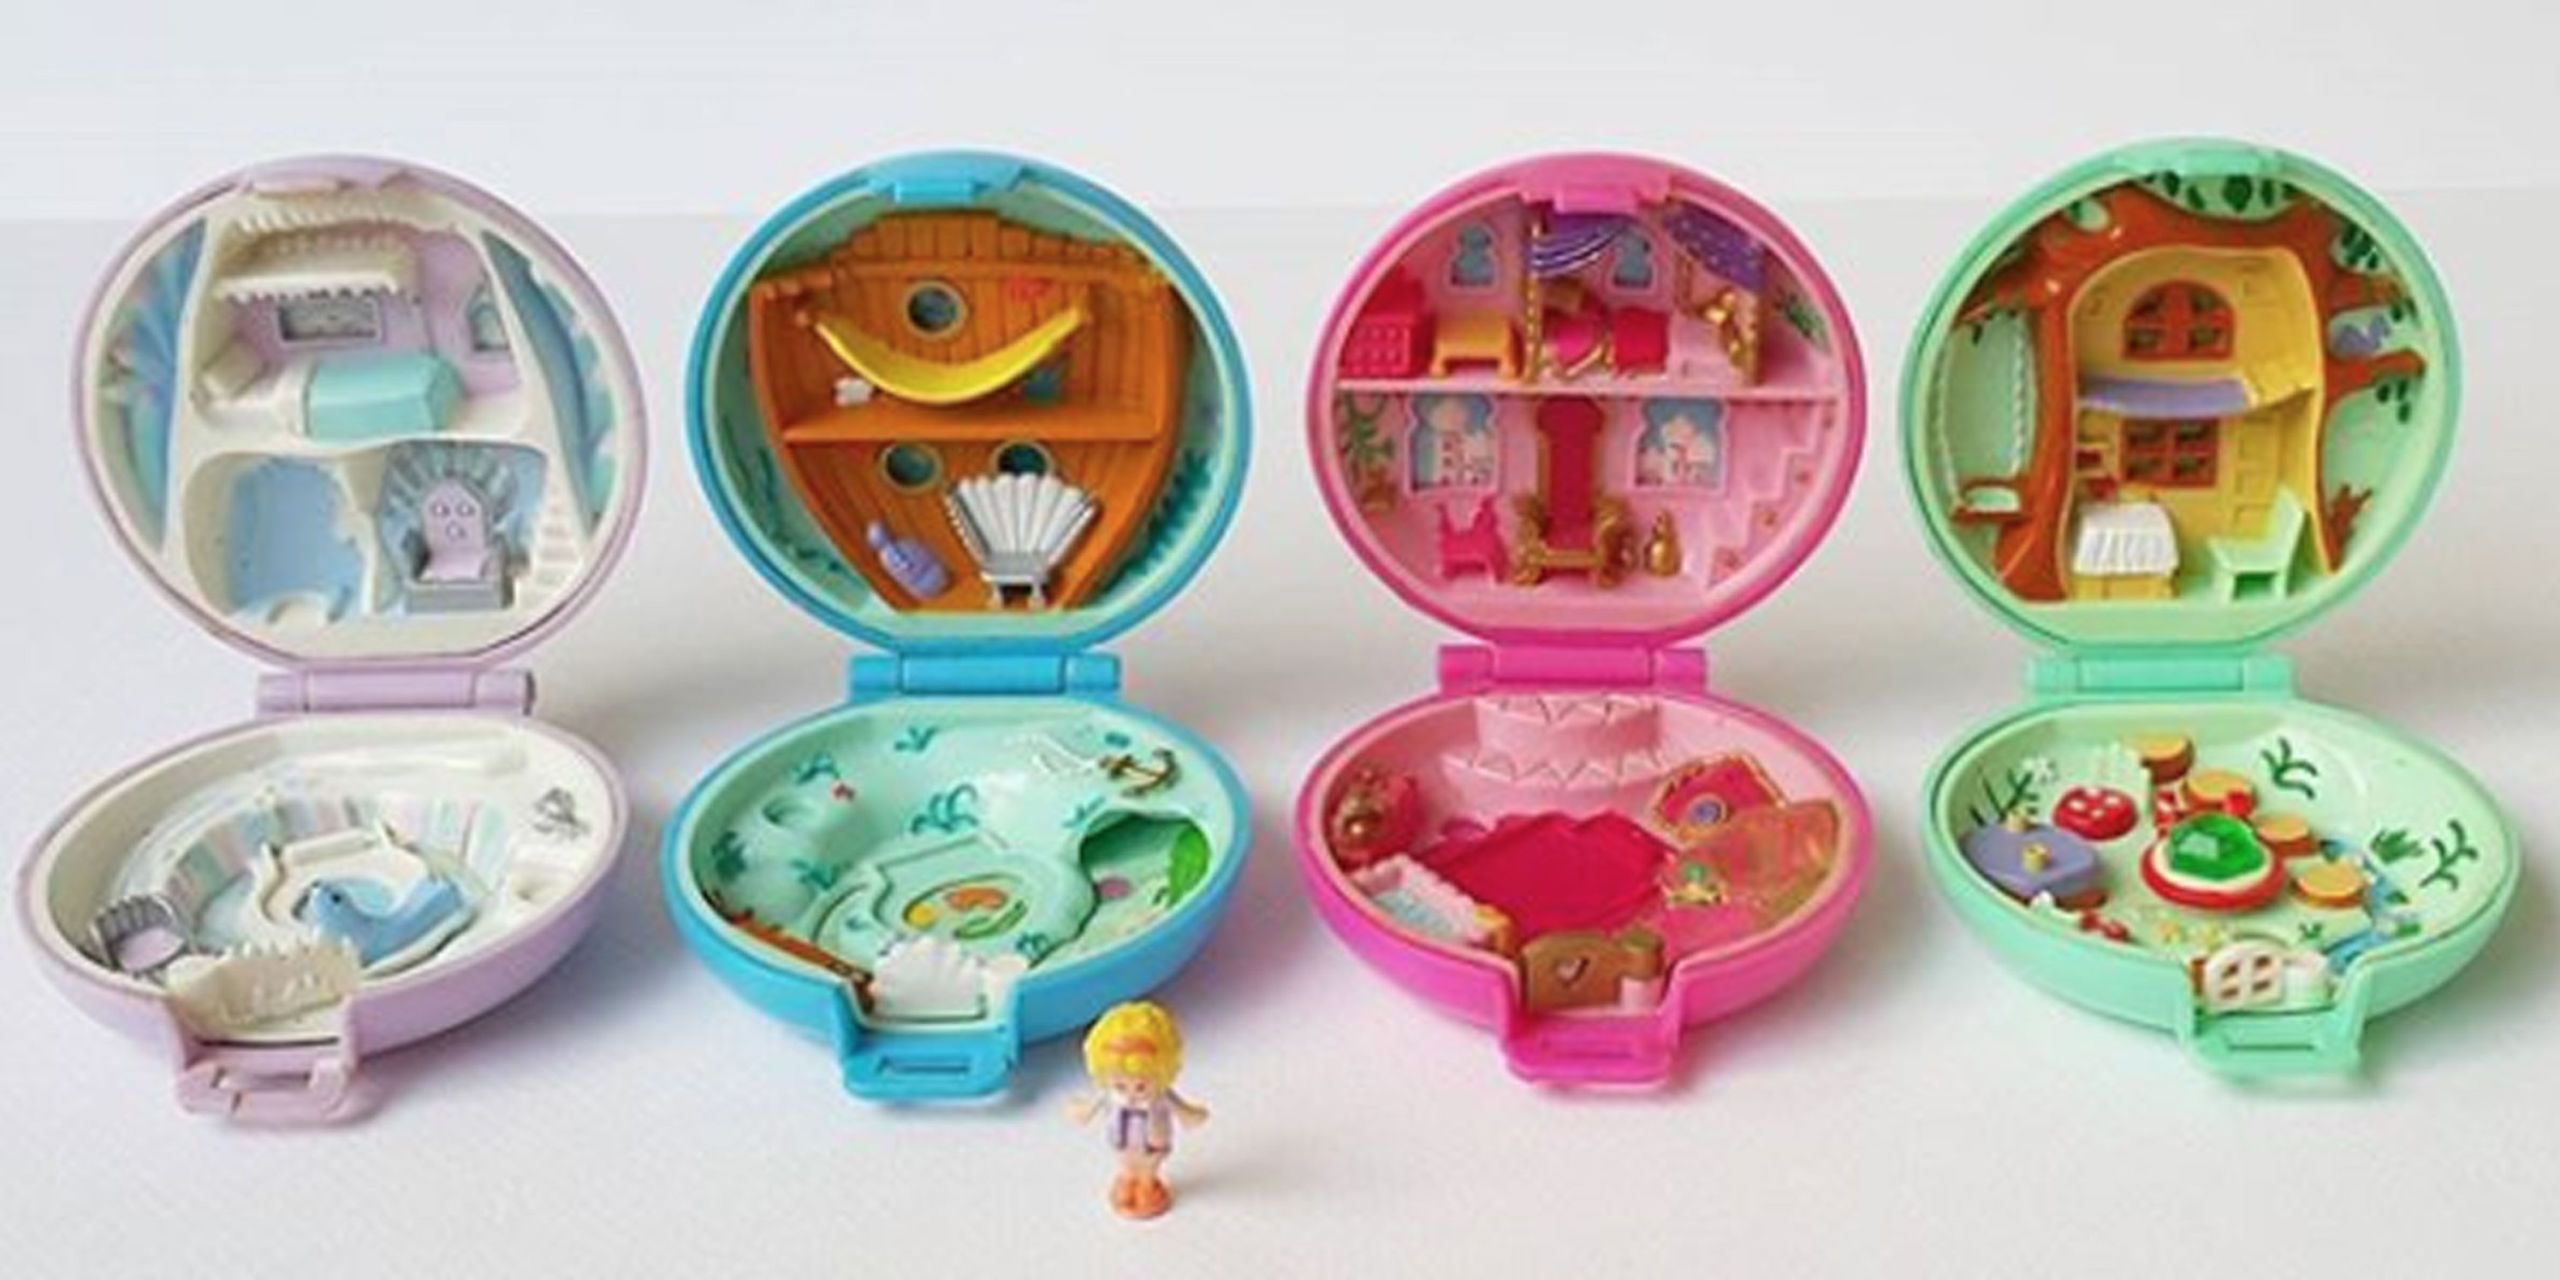 polly pockets from the 2000s